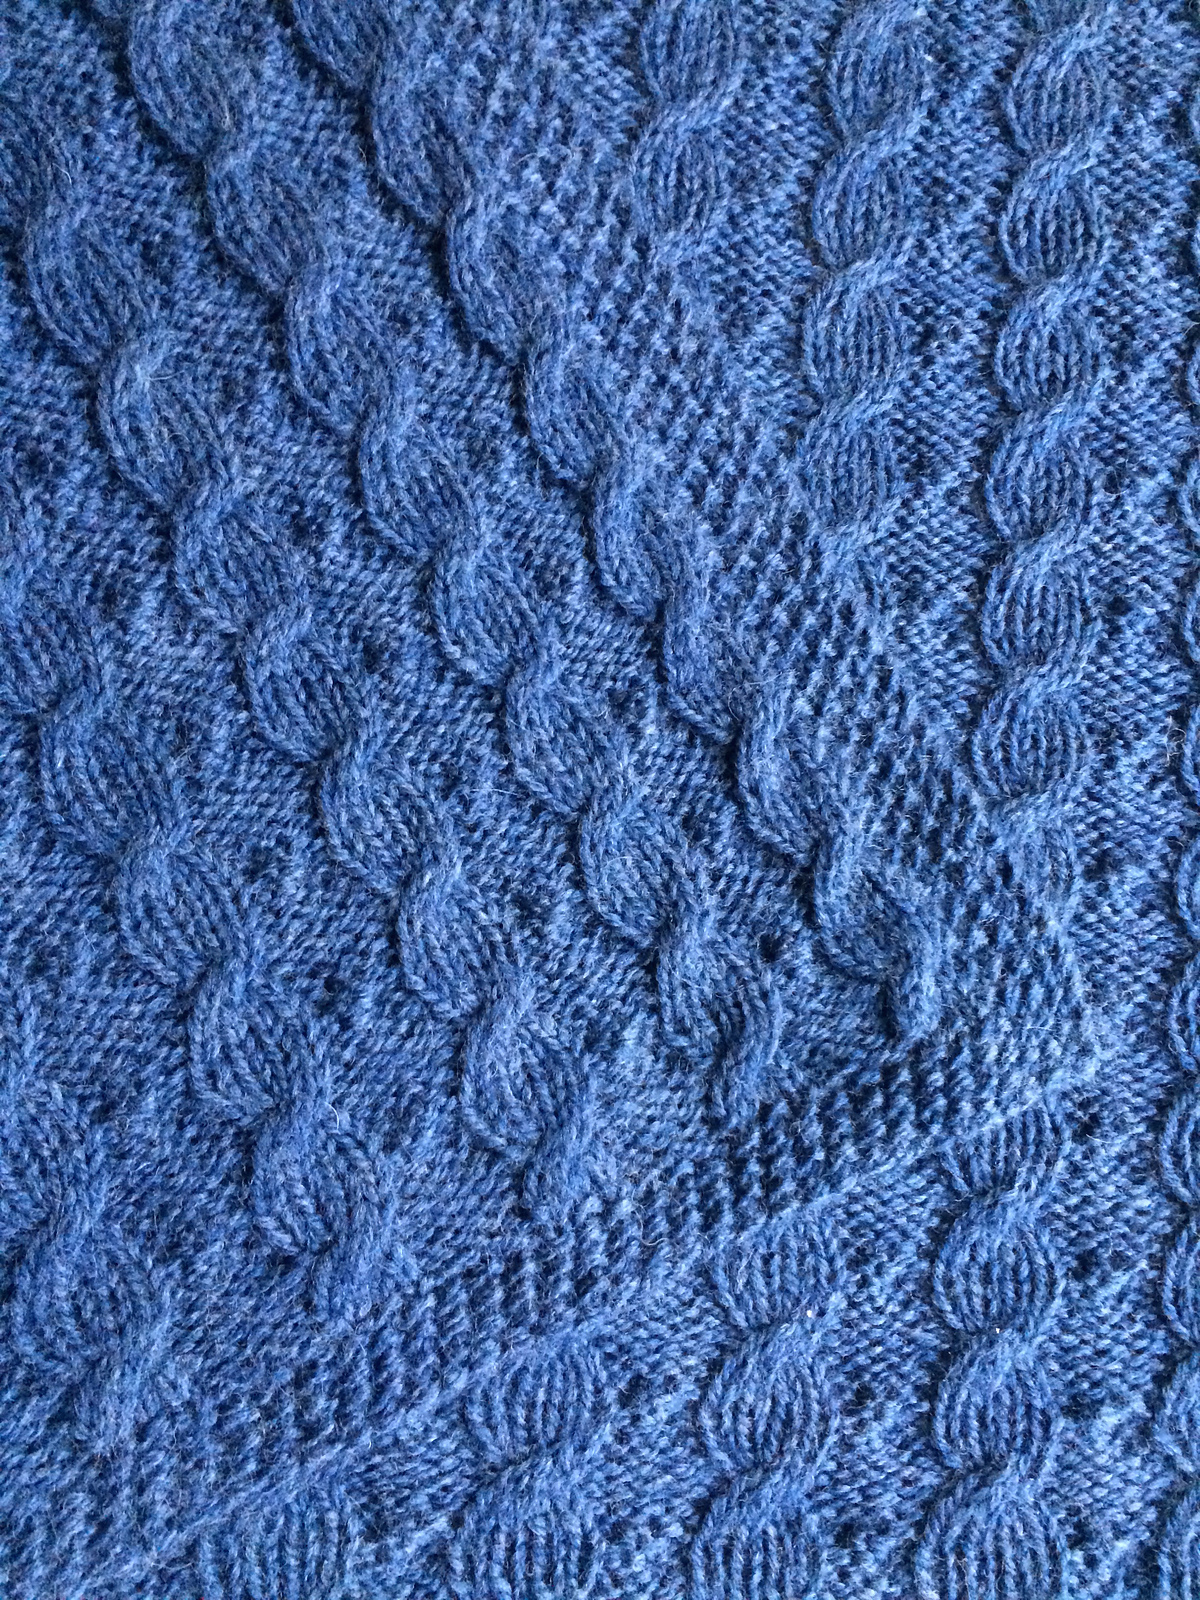 Free Knit Cable Patterns Reversible Blanket Knitting Patterns In The Loop Knitting